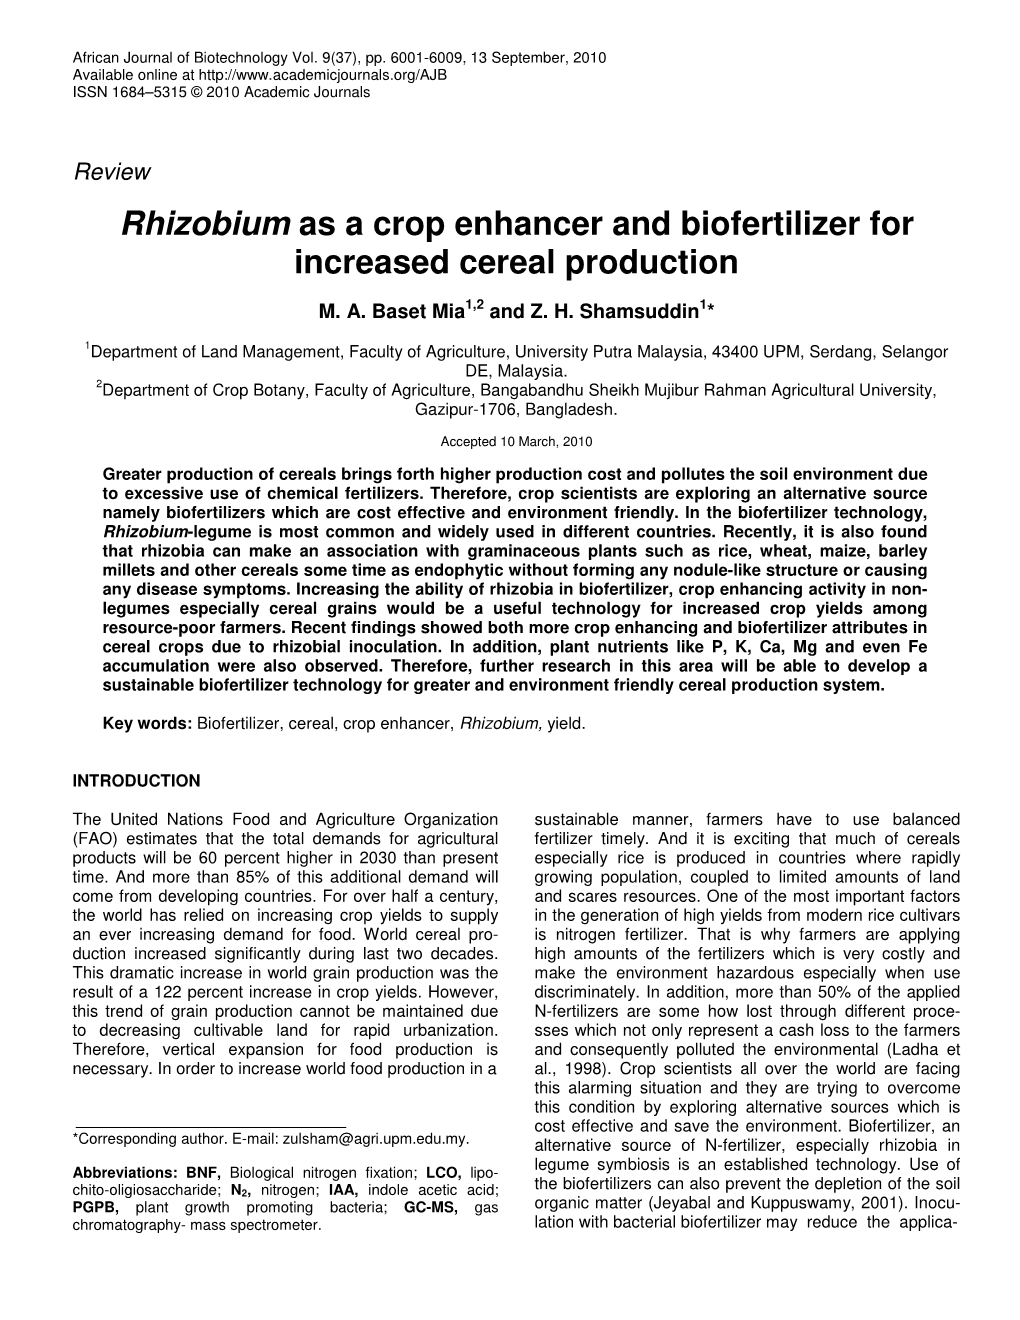 Rhizobium As a Crop Enhancer and Biofertilizer for Increased Cereal Production